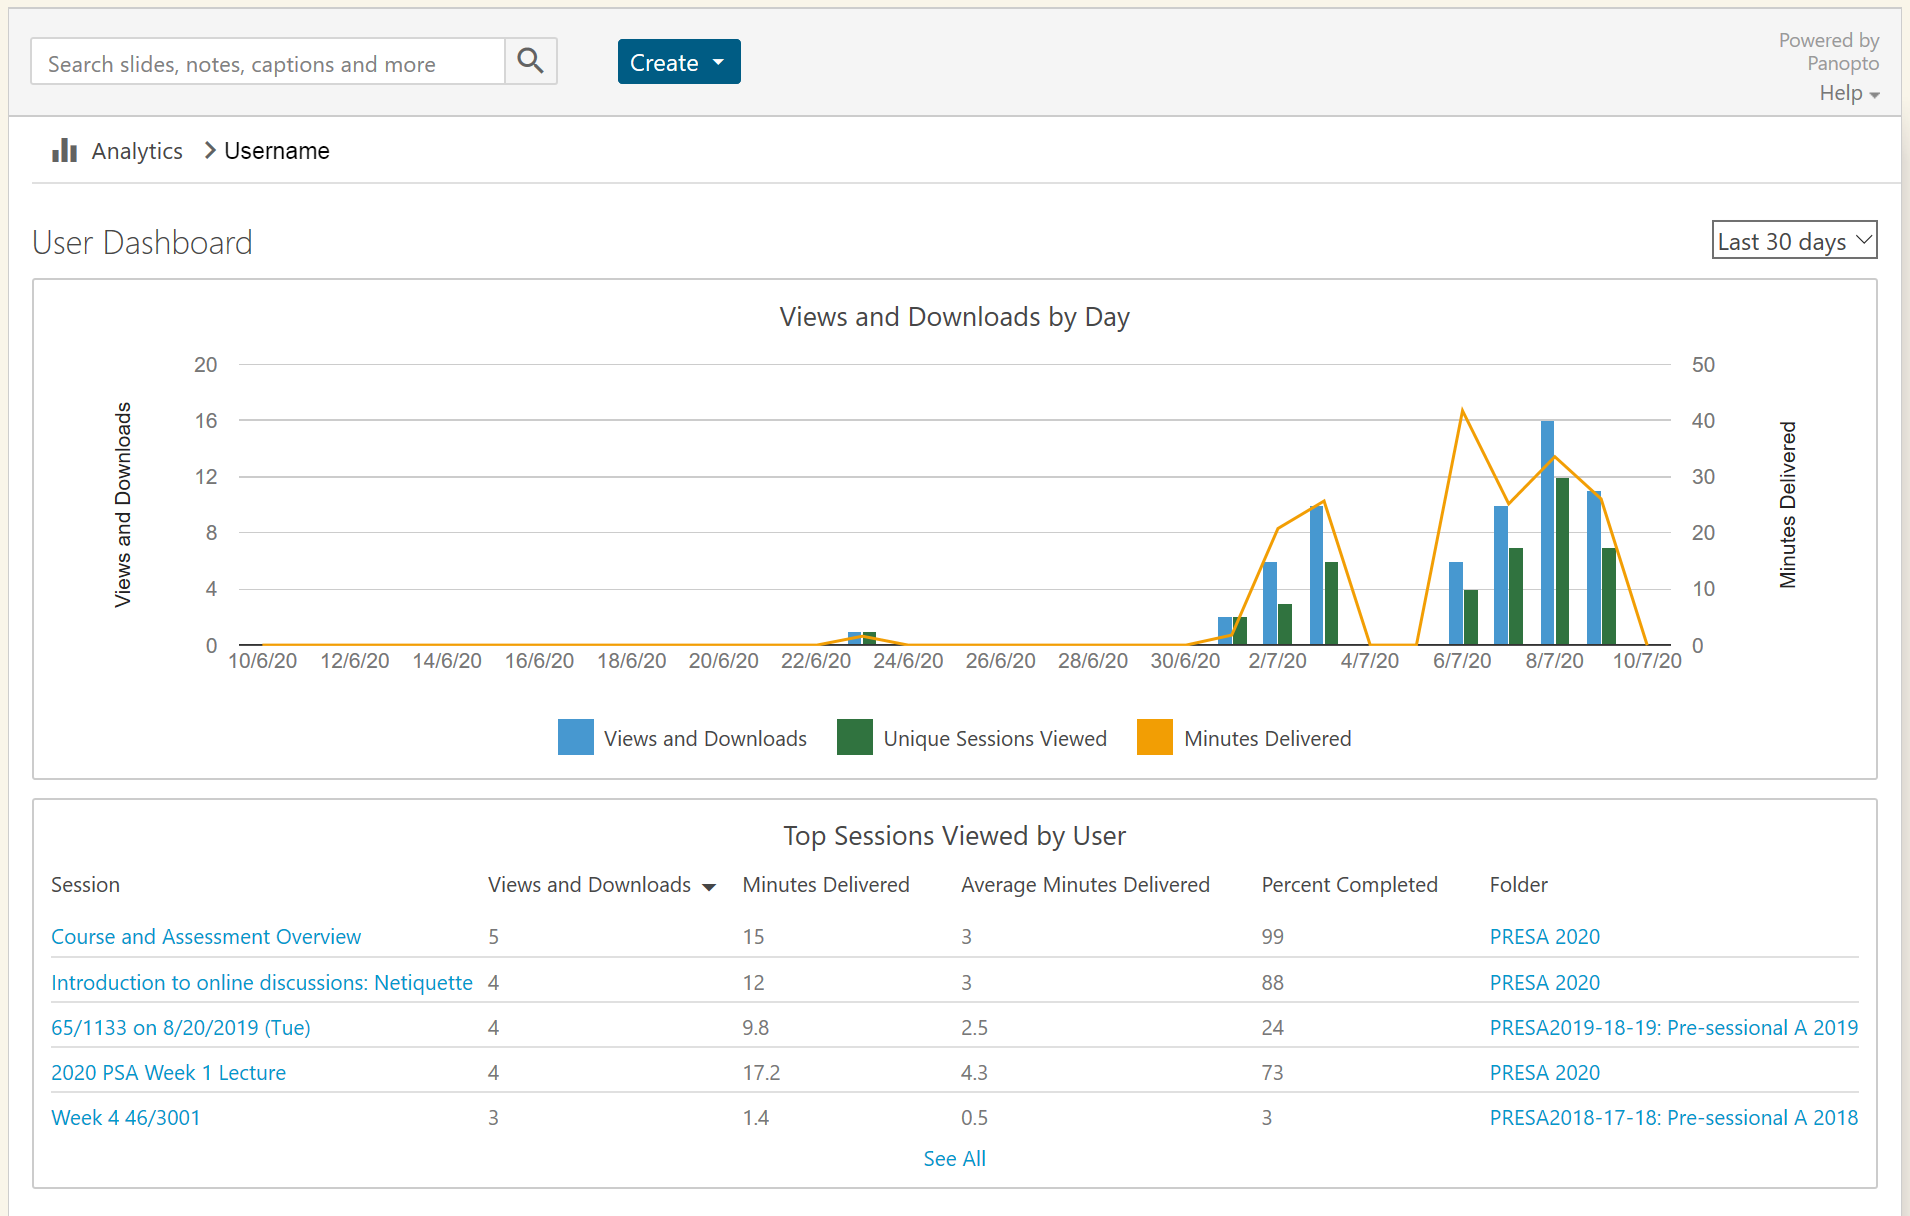 A Panopto users individual stats view page. Showing various graphs and stats. These are specific to that individual user.